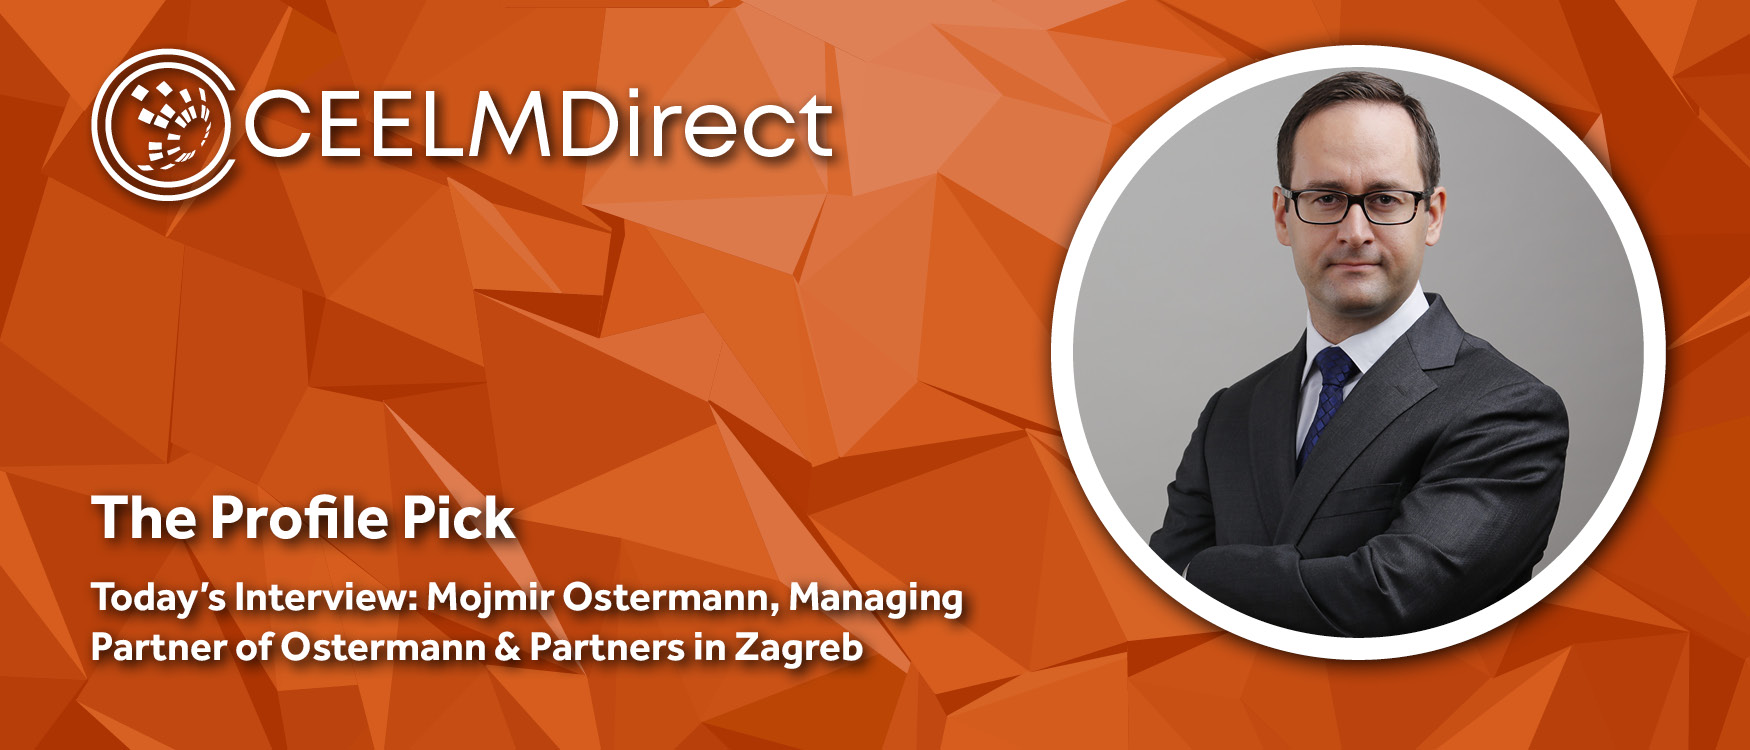 The CEELMDirect Profile Pick: An Interview with Mojmir Ostermann of Ostermann & Partners